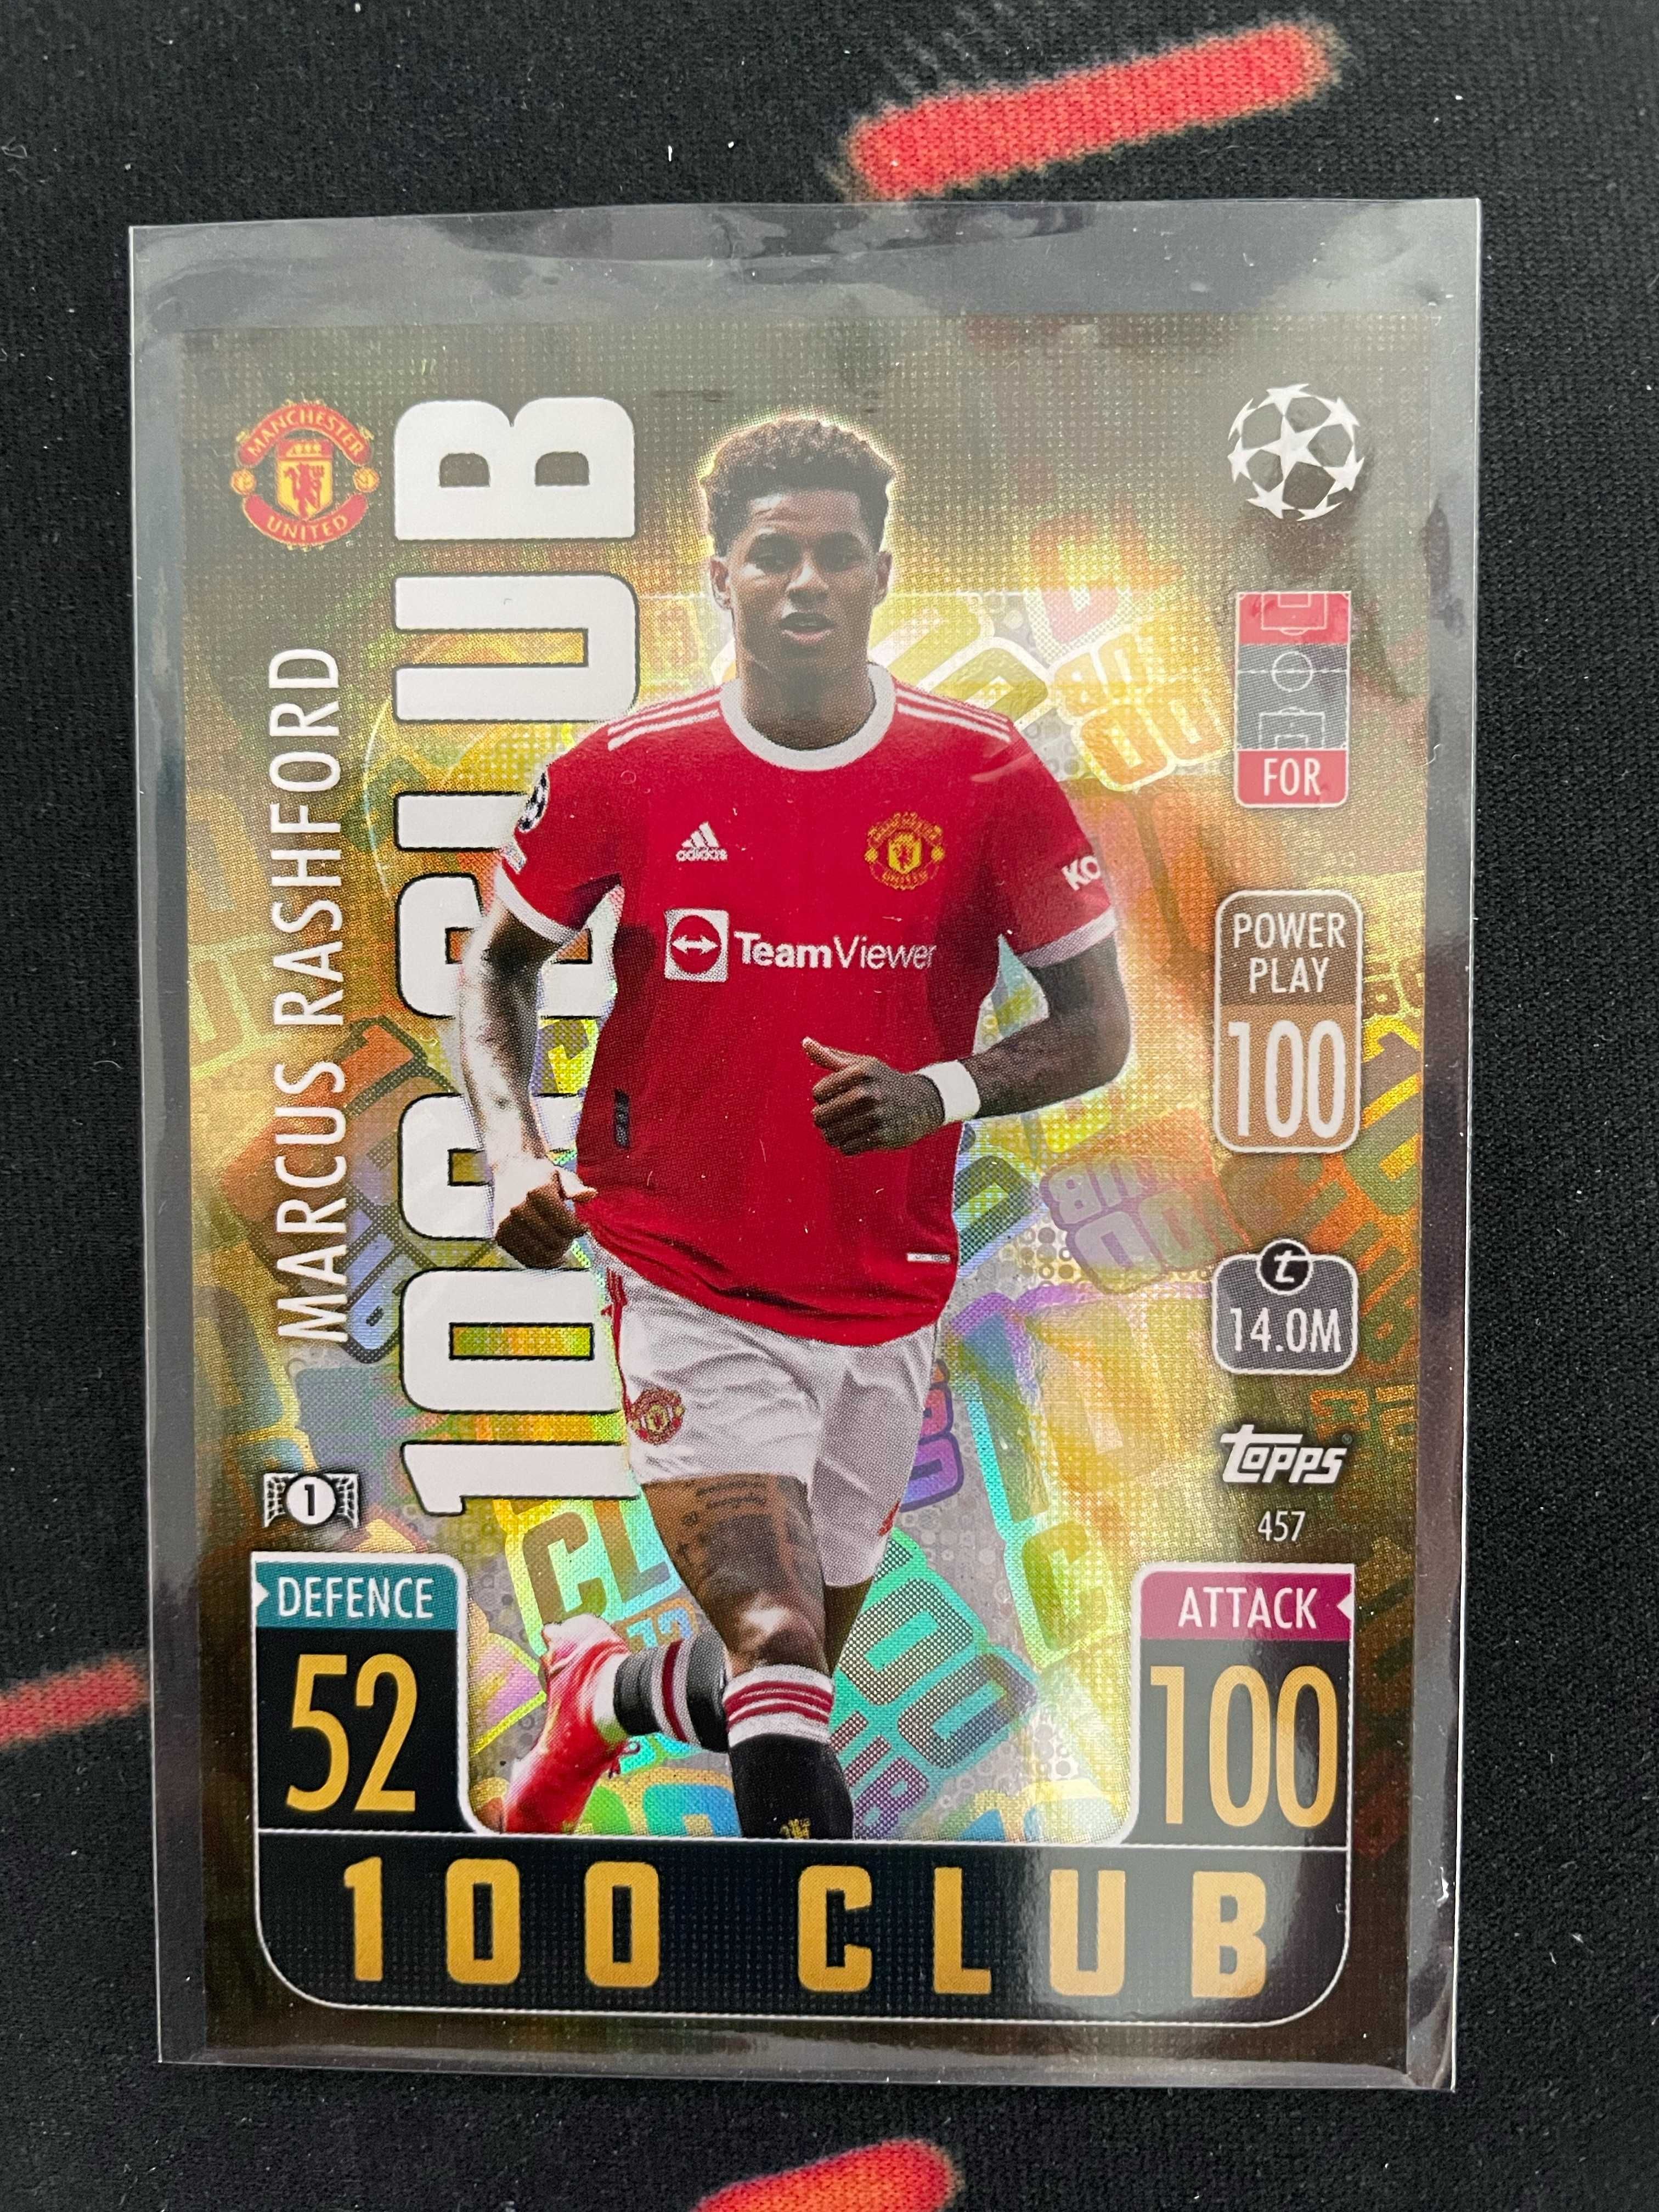 Topps 2021/22 Match Attax (Chrome, Limited edition,100 club) *restock*